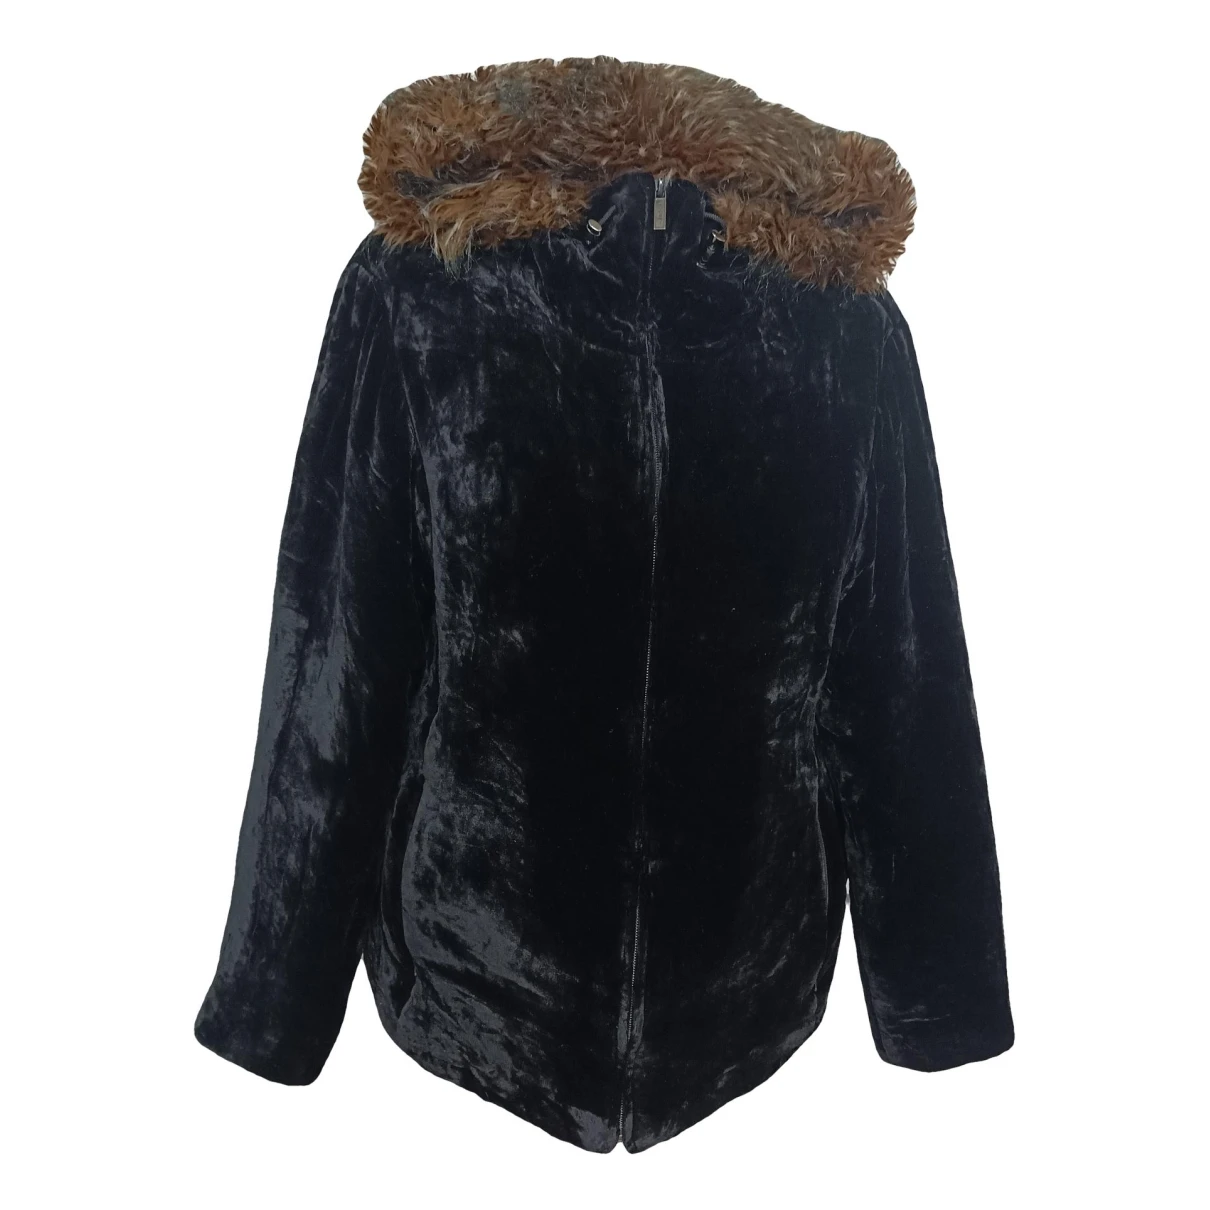 clothing Lauren Ralph Lauren jackets for Female Faux fur S International. Used condition